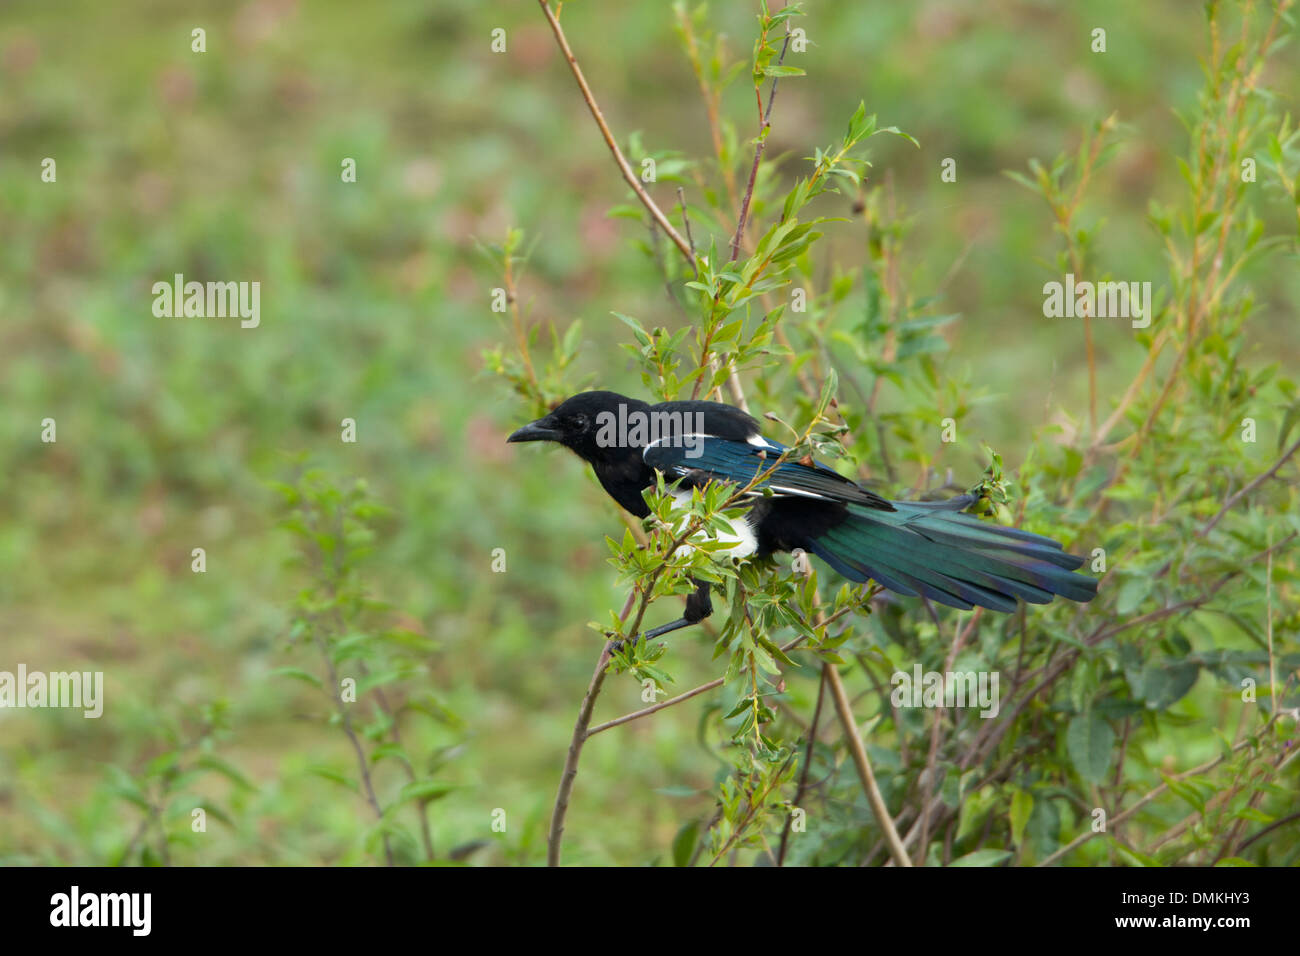 Black-billed Magpie Pica pica adult Stock Photo